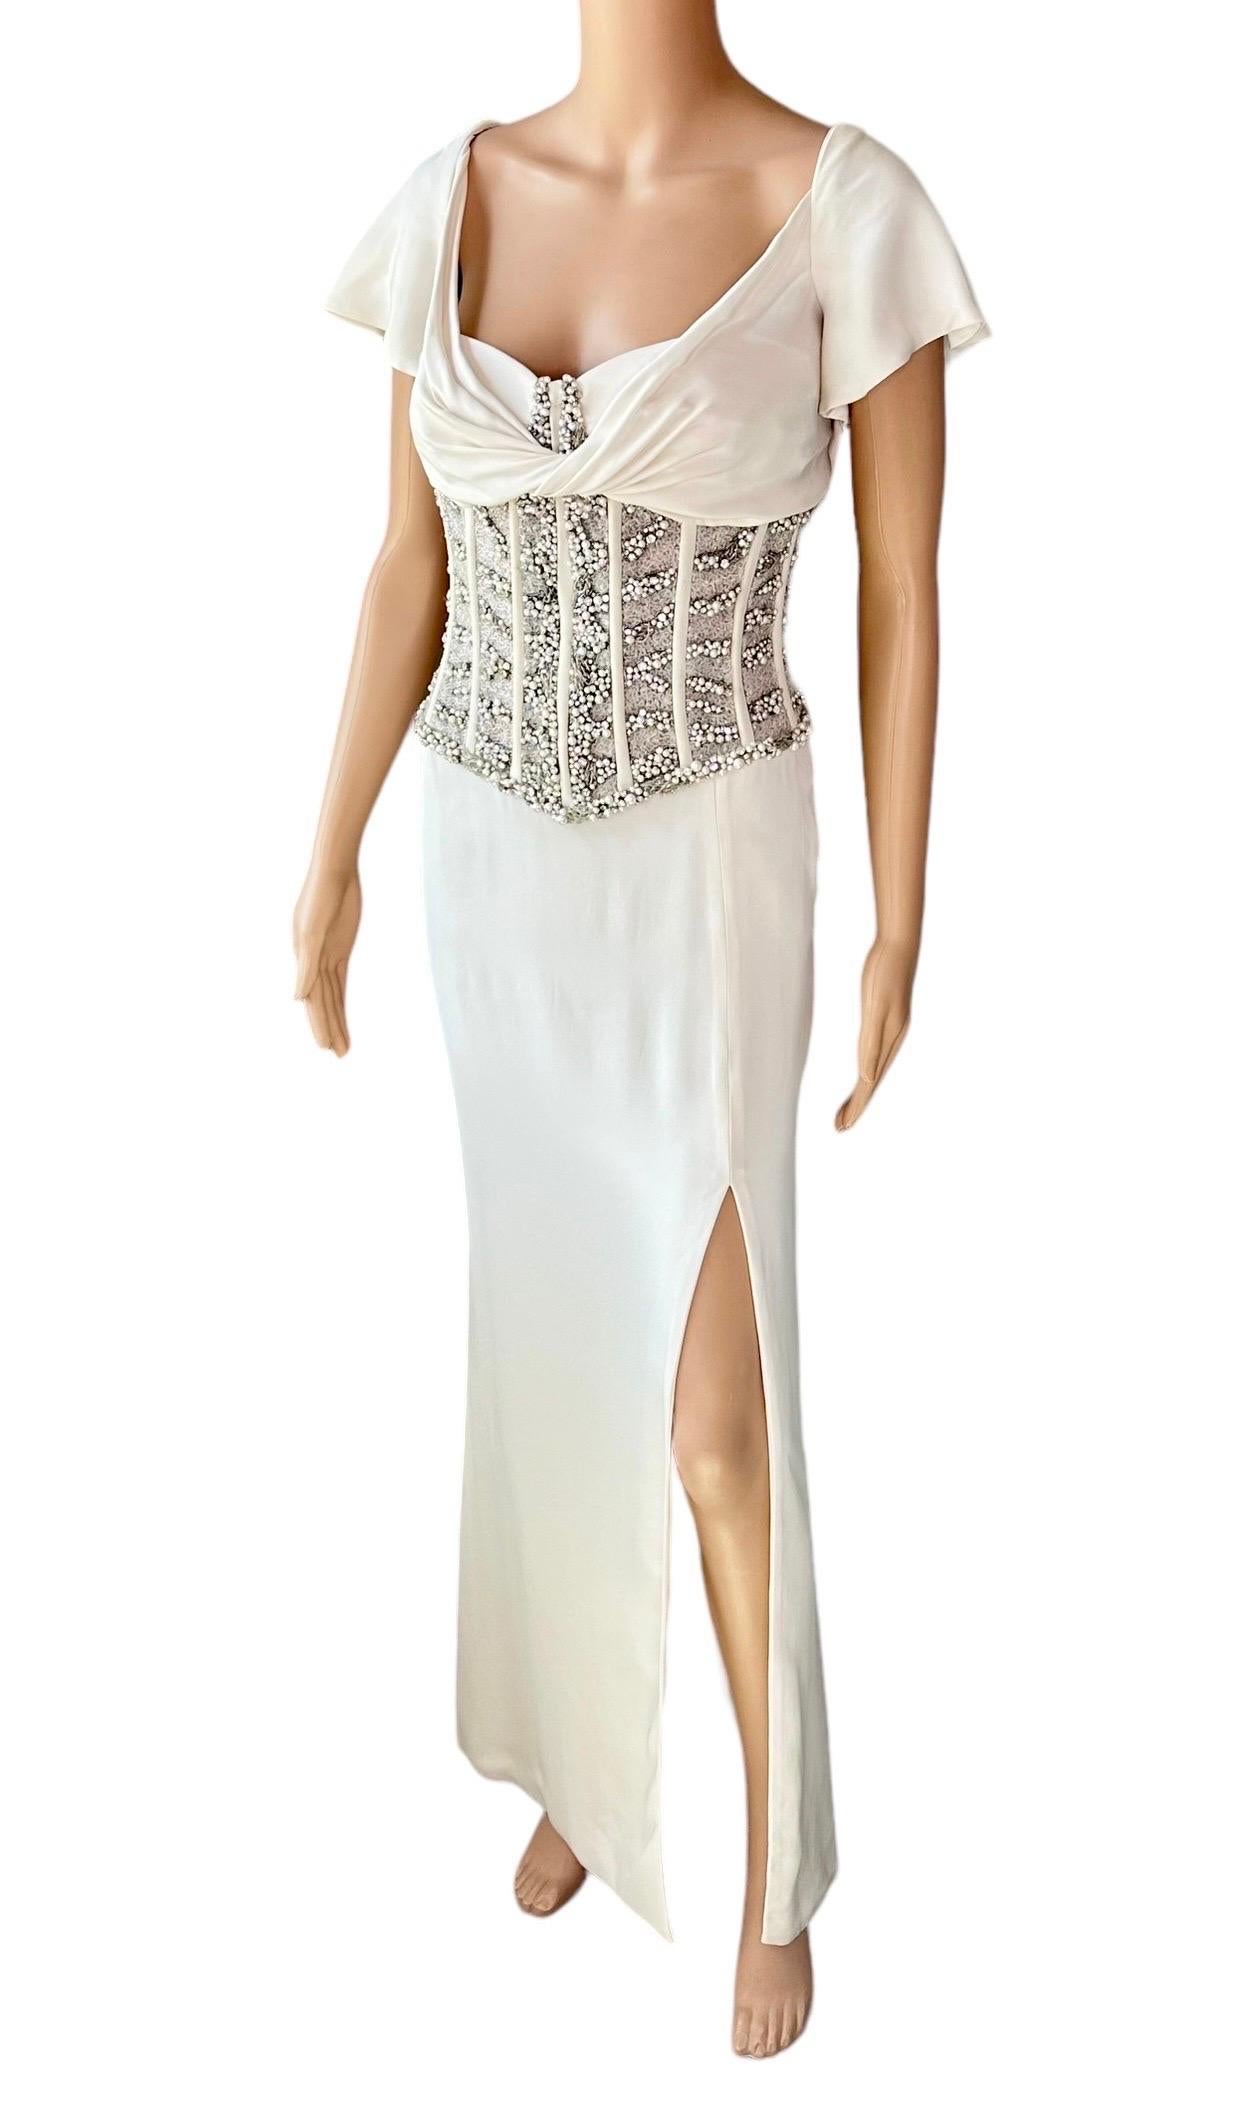 Roberto Cavalli Embellished Corset Empire Silhouette Evening Dress Gown For Sale 4